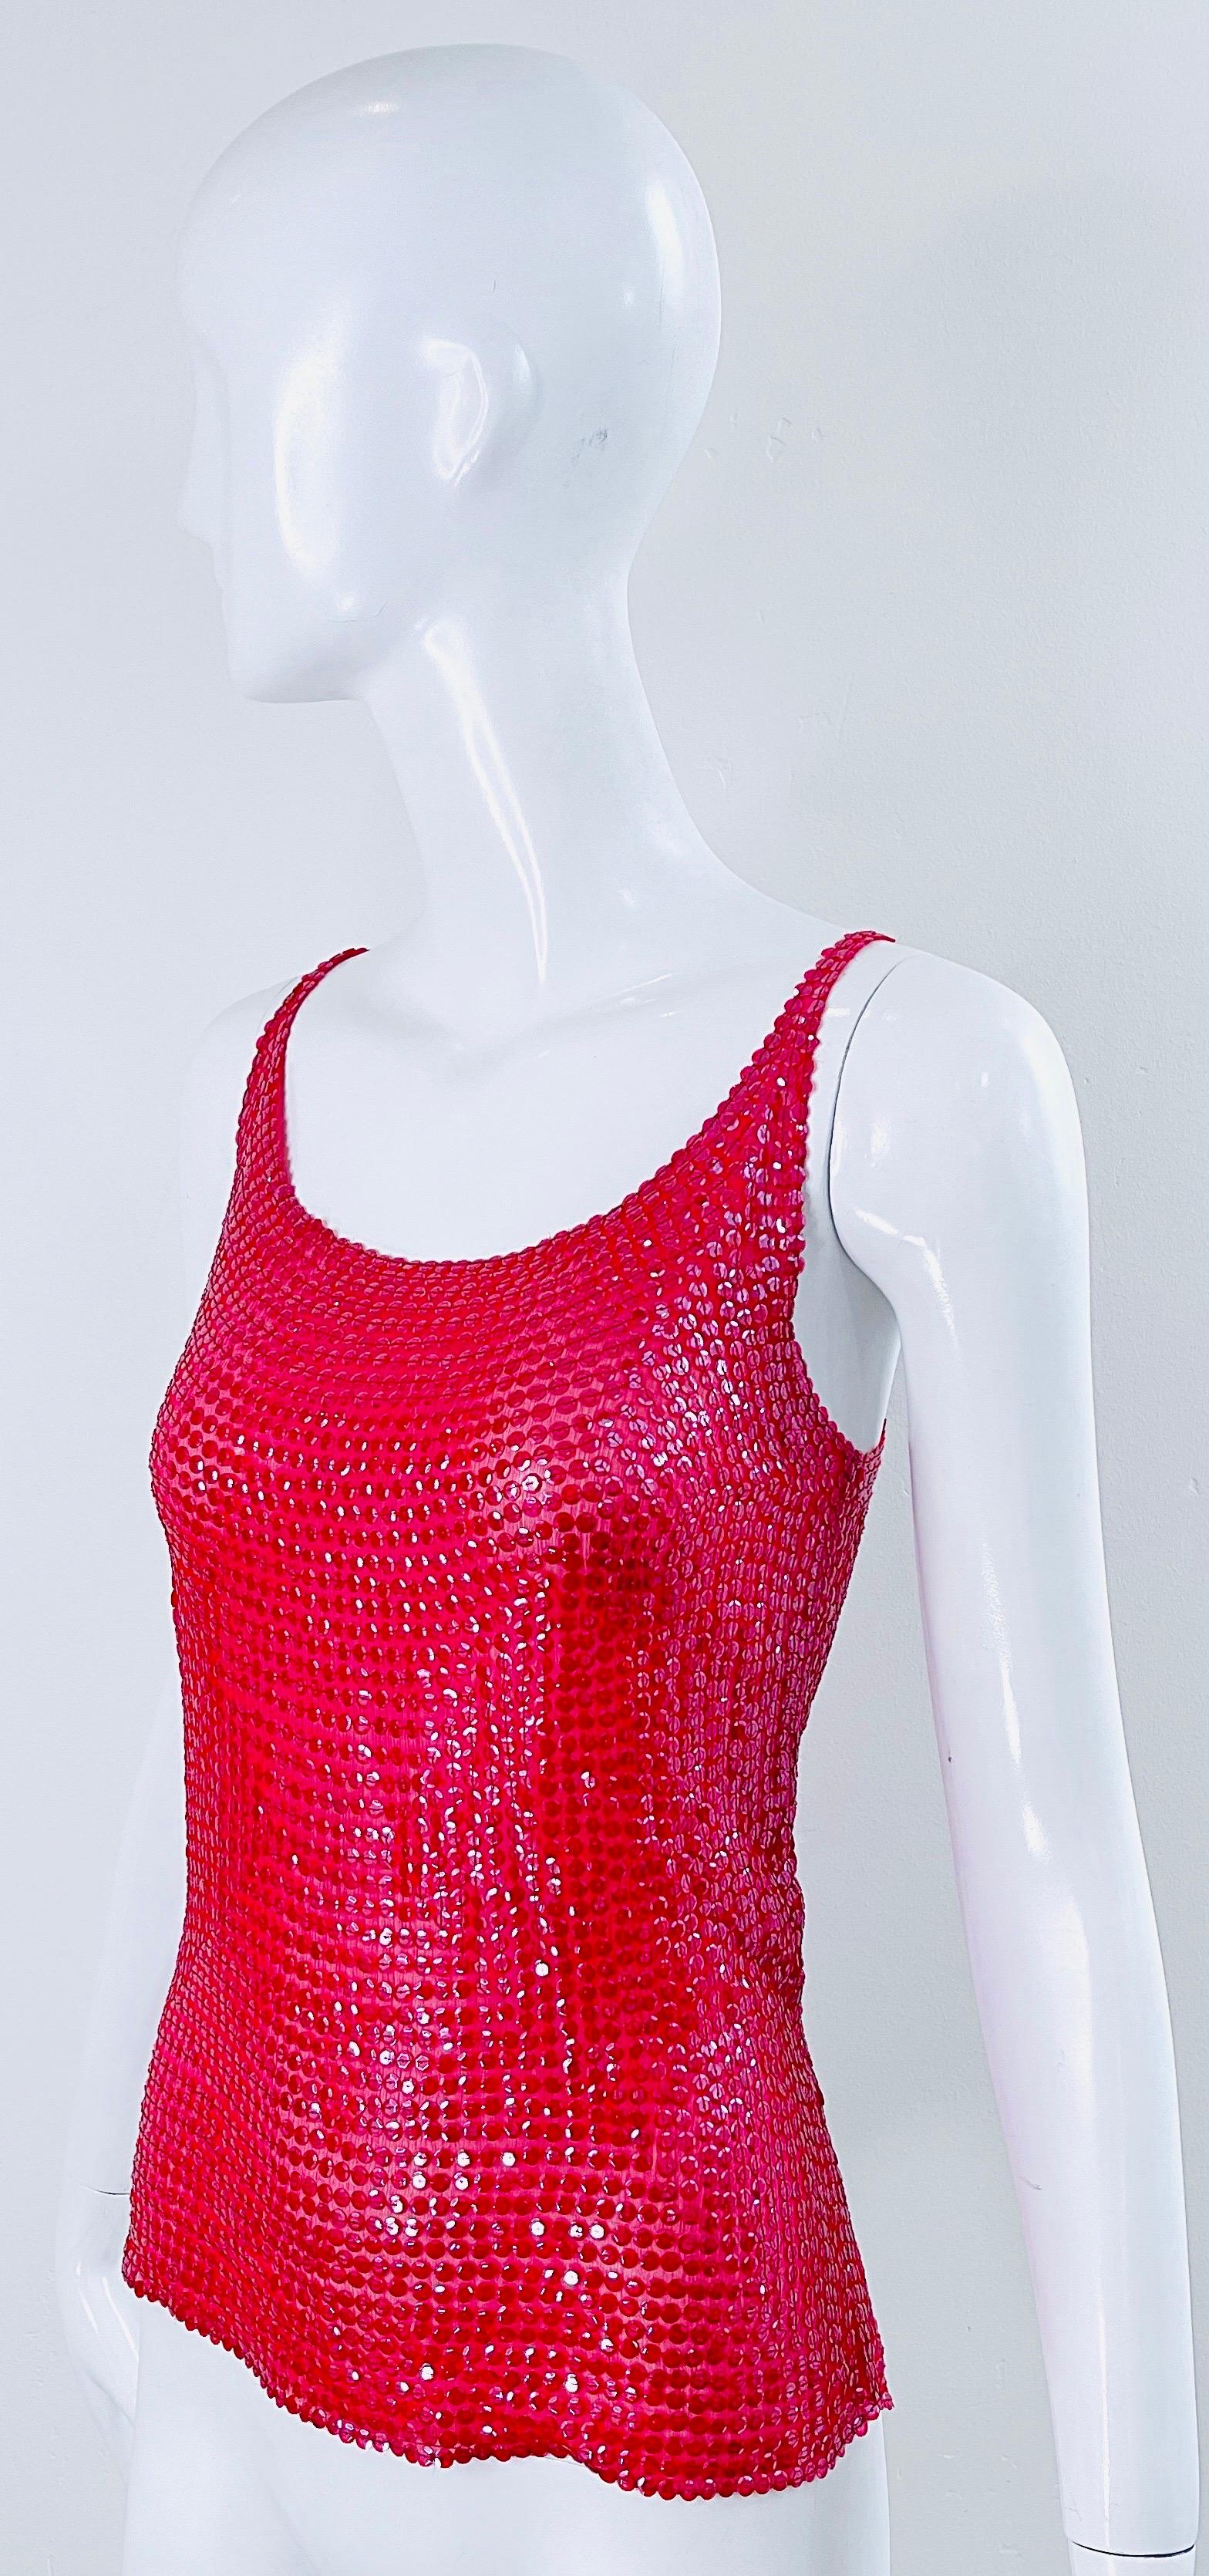 Halston 1970s Lipstick Red Silk Chiffon Fully Sequin Vintage 70s Sleeveless Top For Sale 6